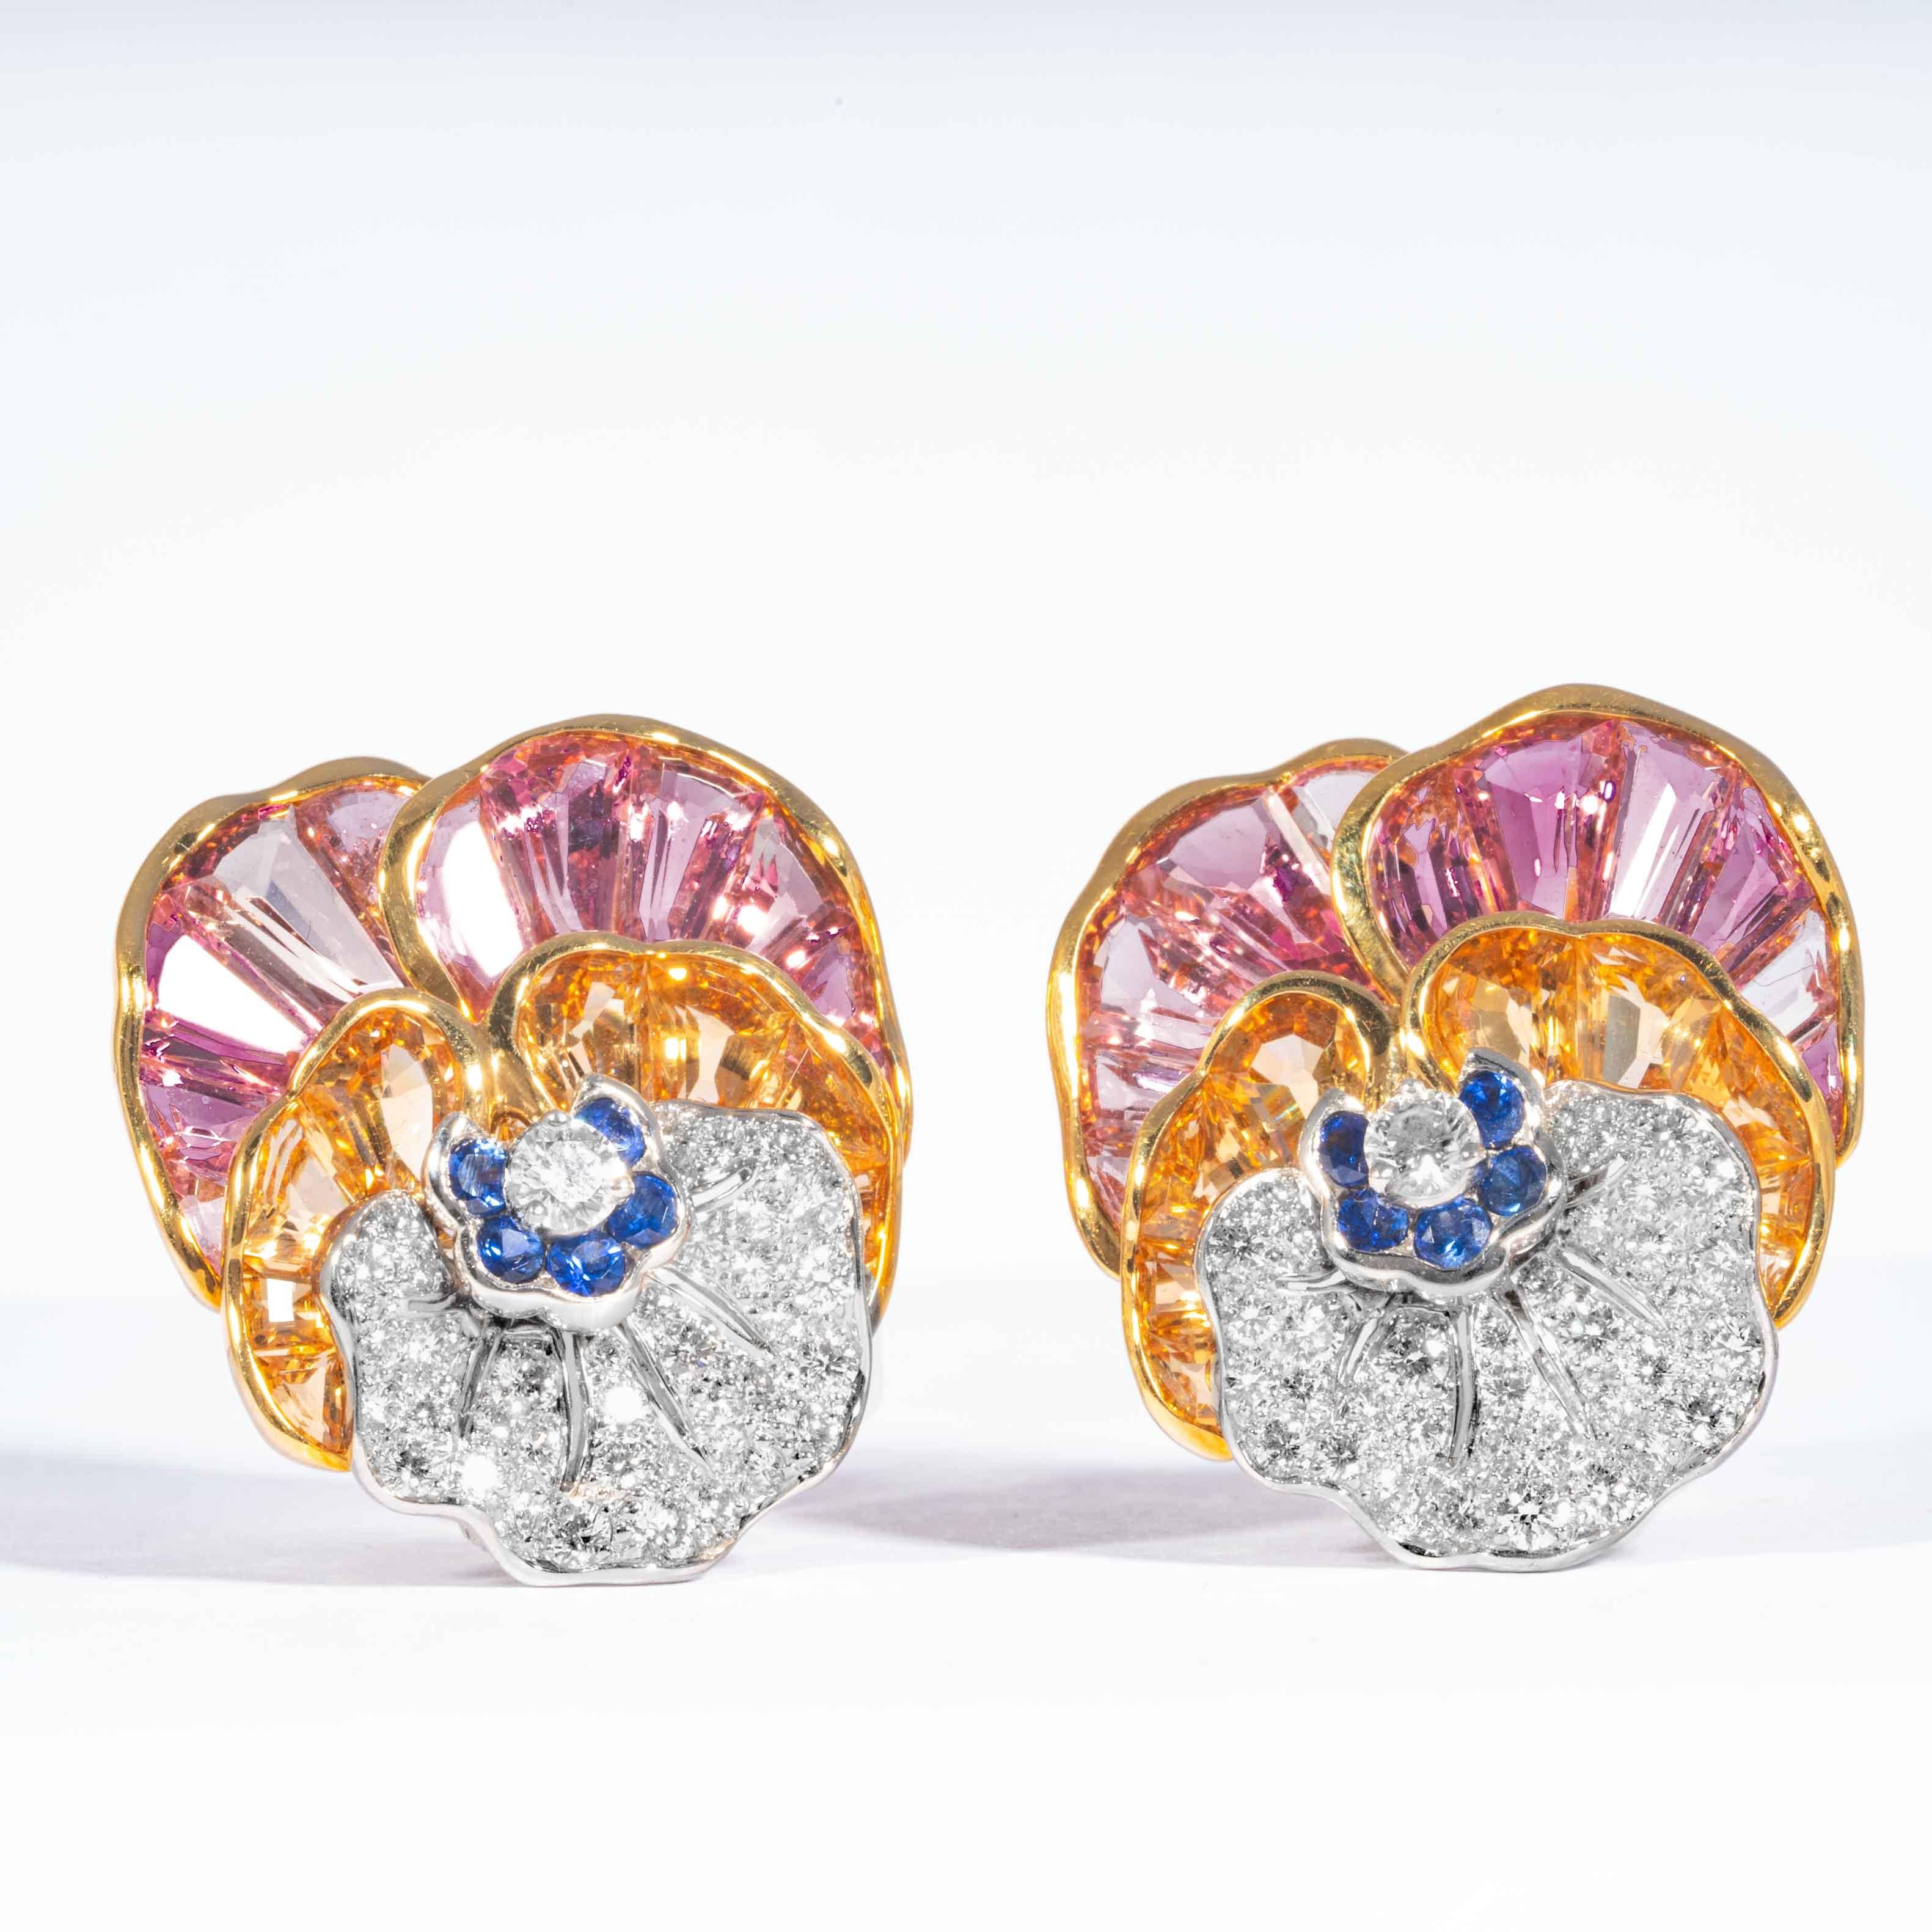 These unmistakable earrings incorporate pink Topaz, yellowish orange Citrine, blue sapphire, and sparkling white diamonds together in a beautiful display of color to form a unique rendition of Oscar Heyman Brother's icon pansy design. Created in